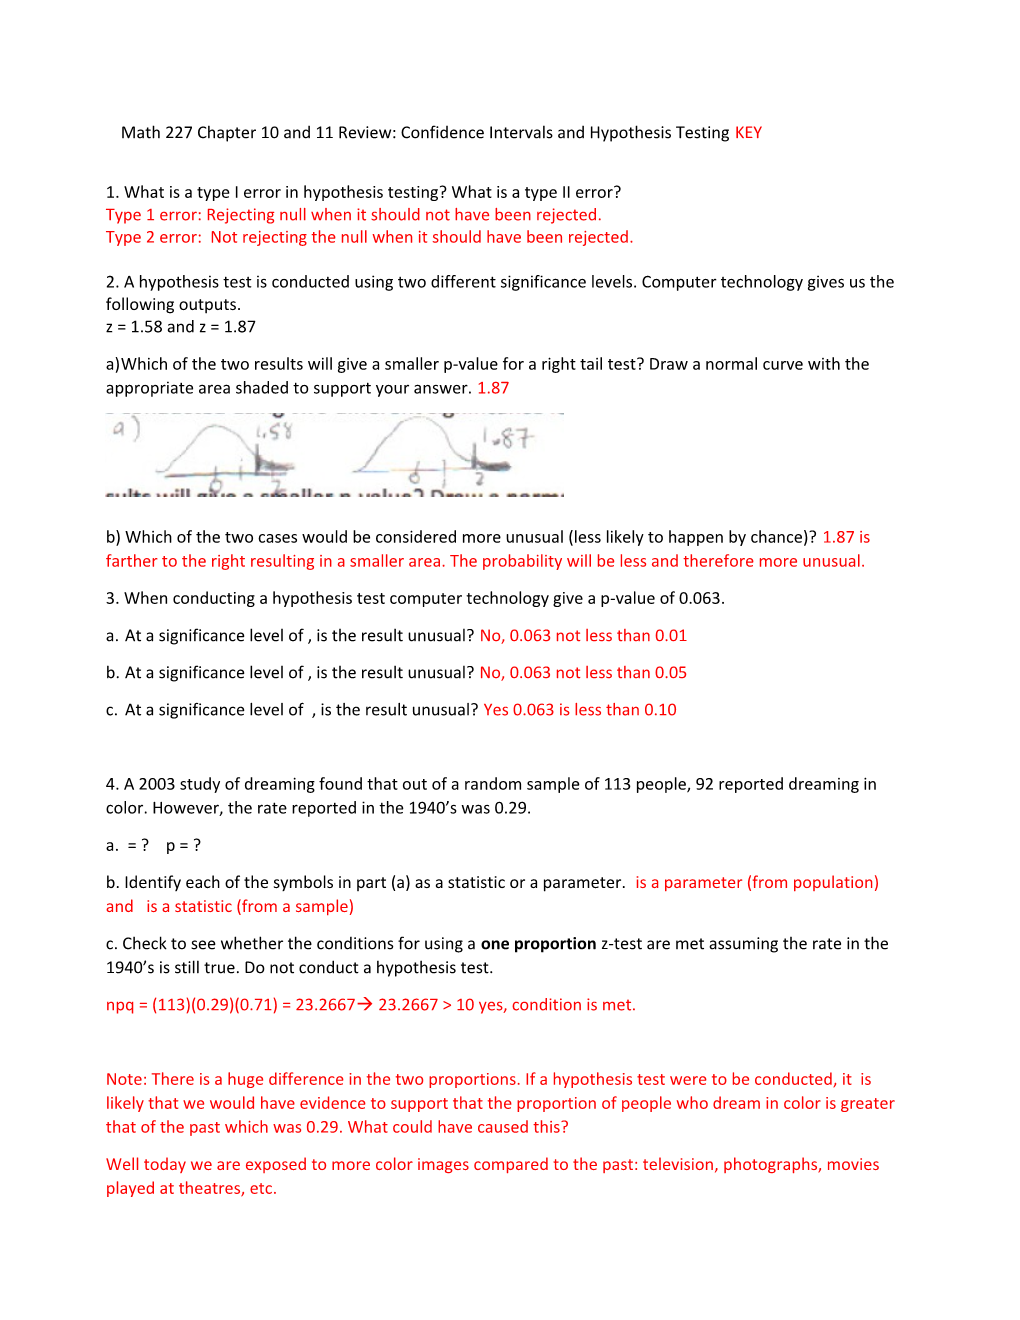 Math 227 Chapter 10 and 11 Review: Confidence Intervals and Hypothesis Testingkey